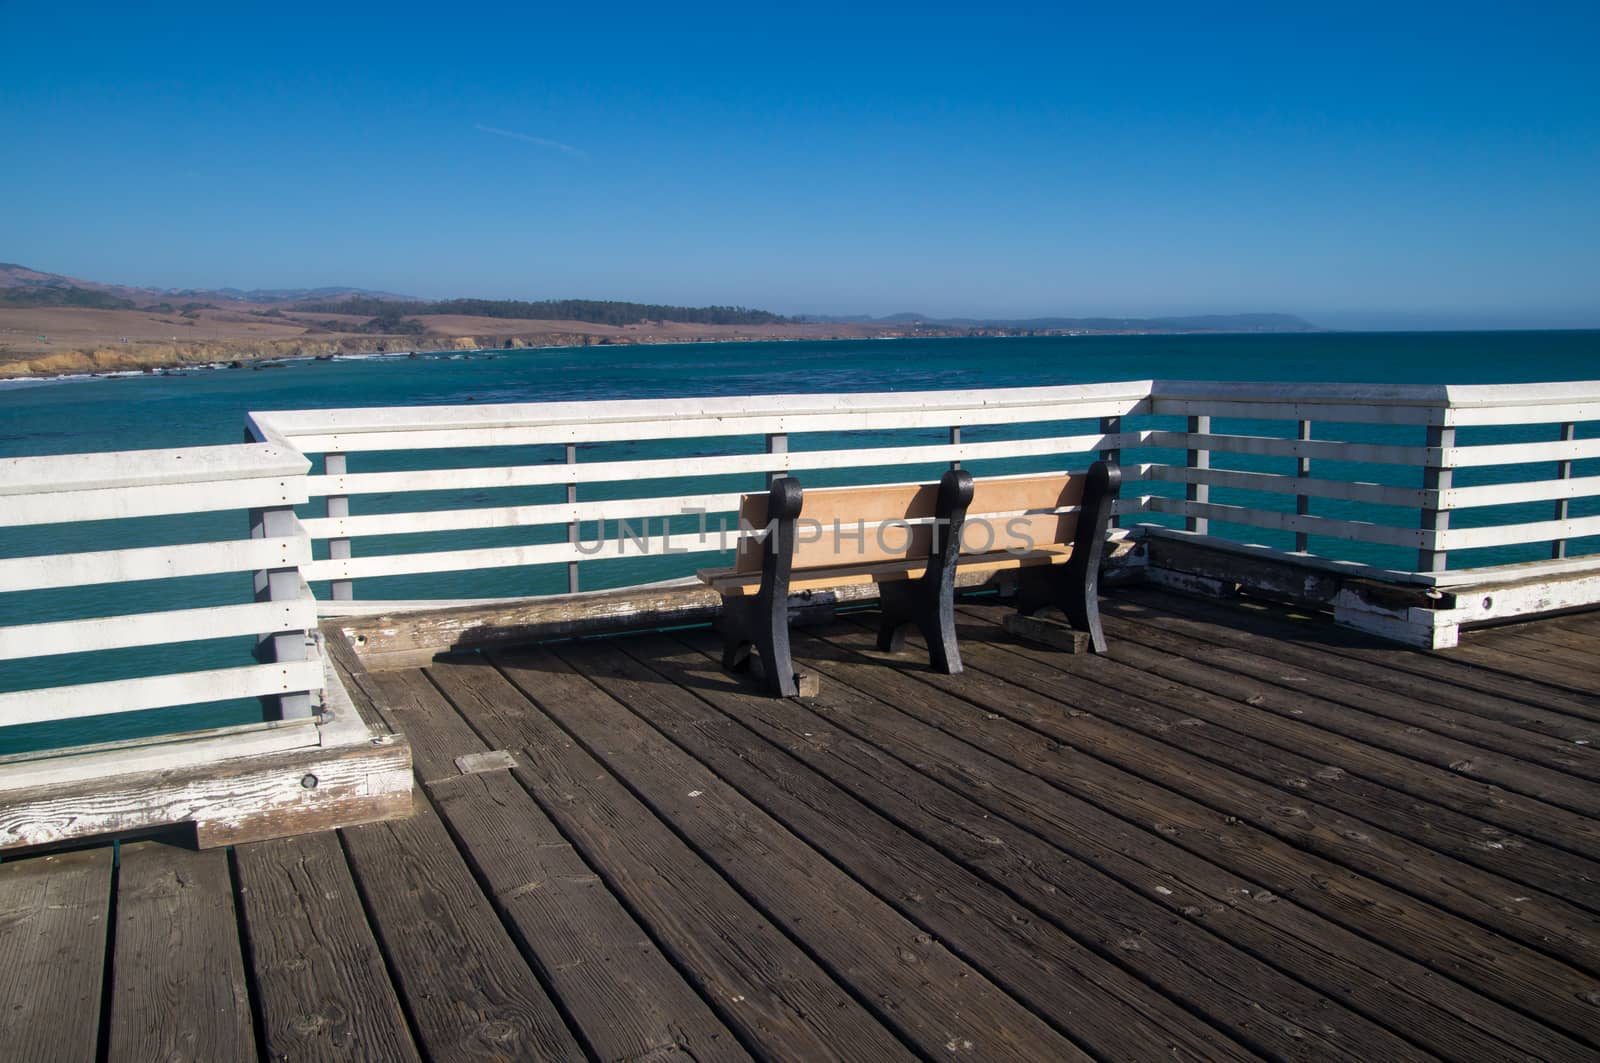 Bench on the Pier by emattil